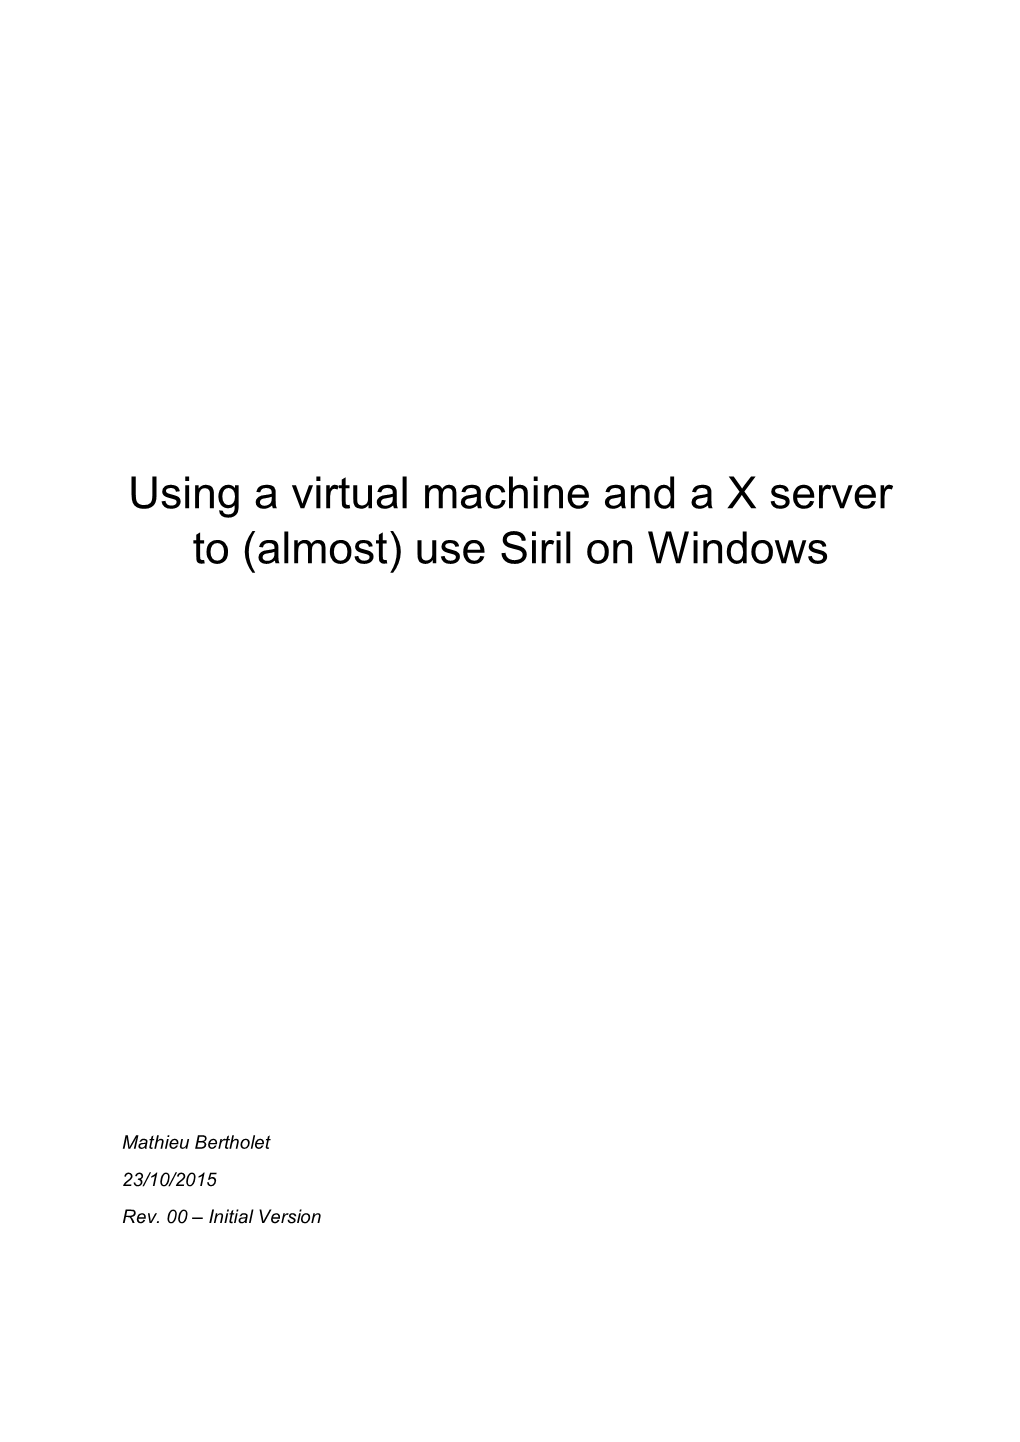 Using a Virtual Machine and a X Server to (Almost) Use Siril on Windows